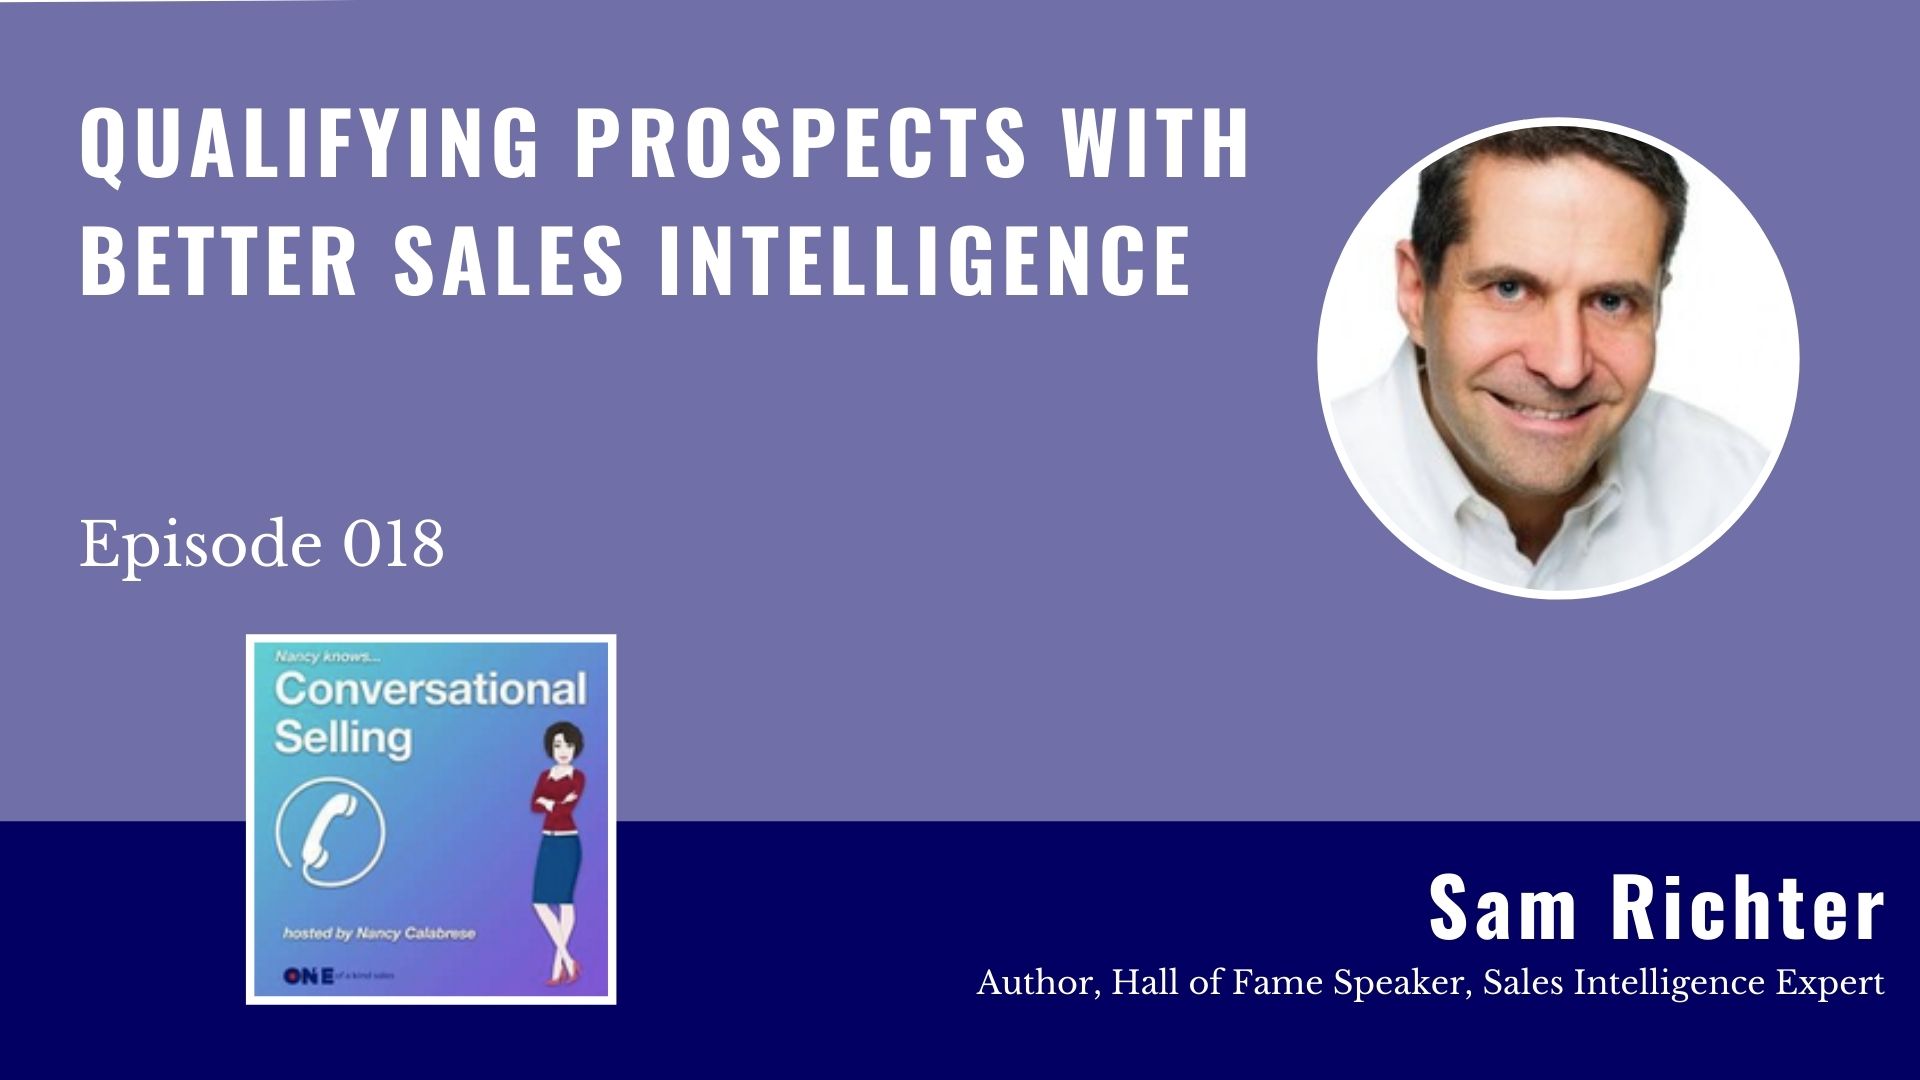 Sam Richter | Qualifying Prospects with Better Sales Intelligence